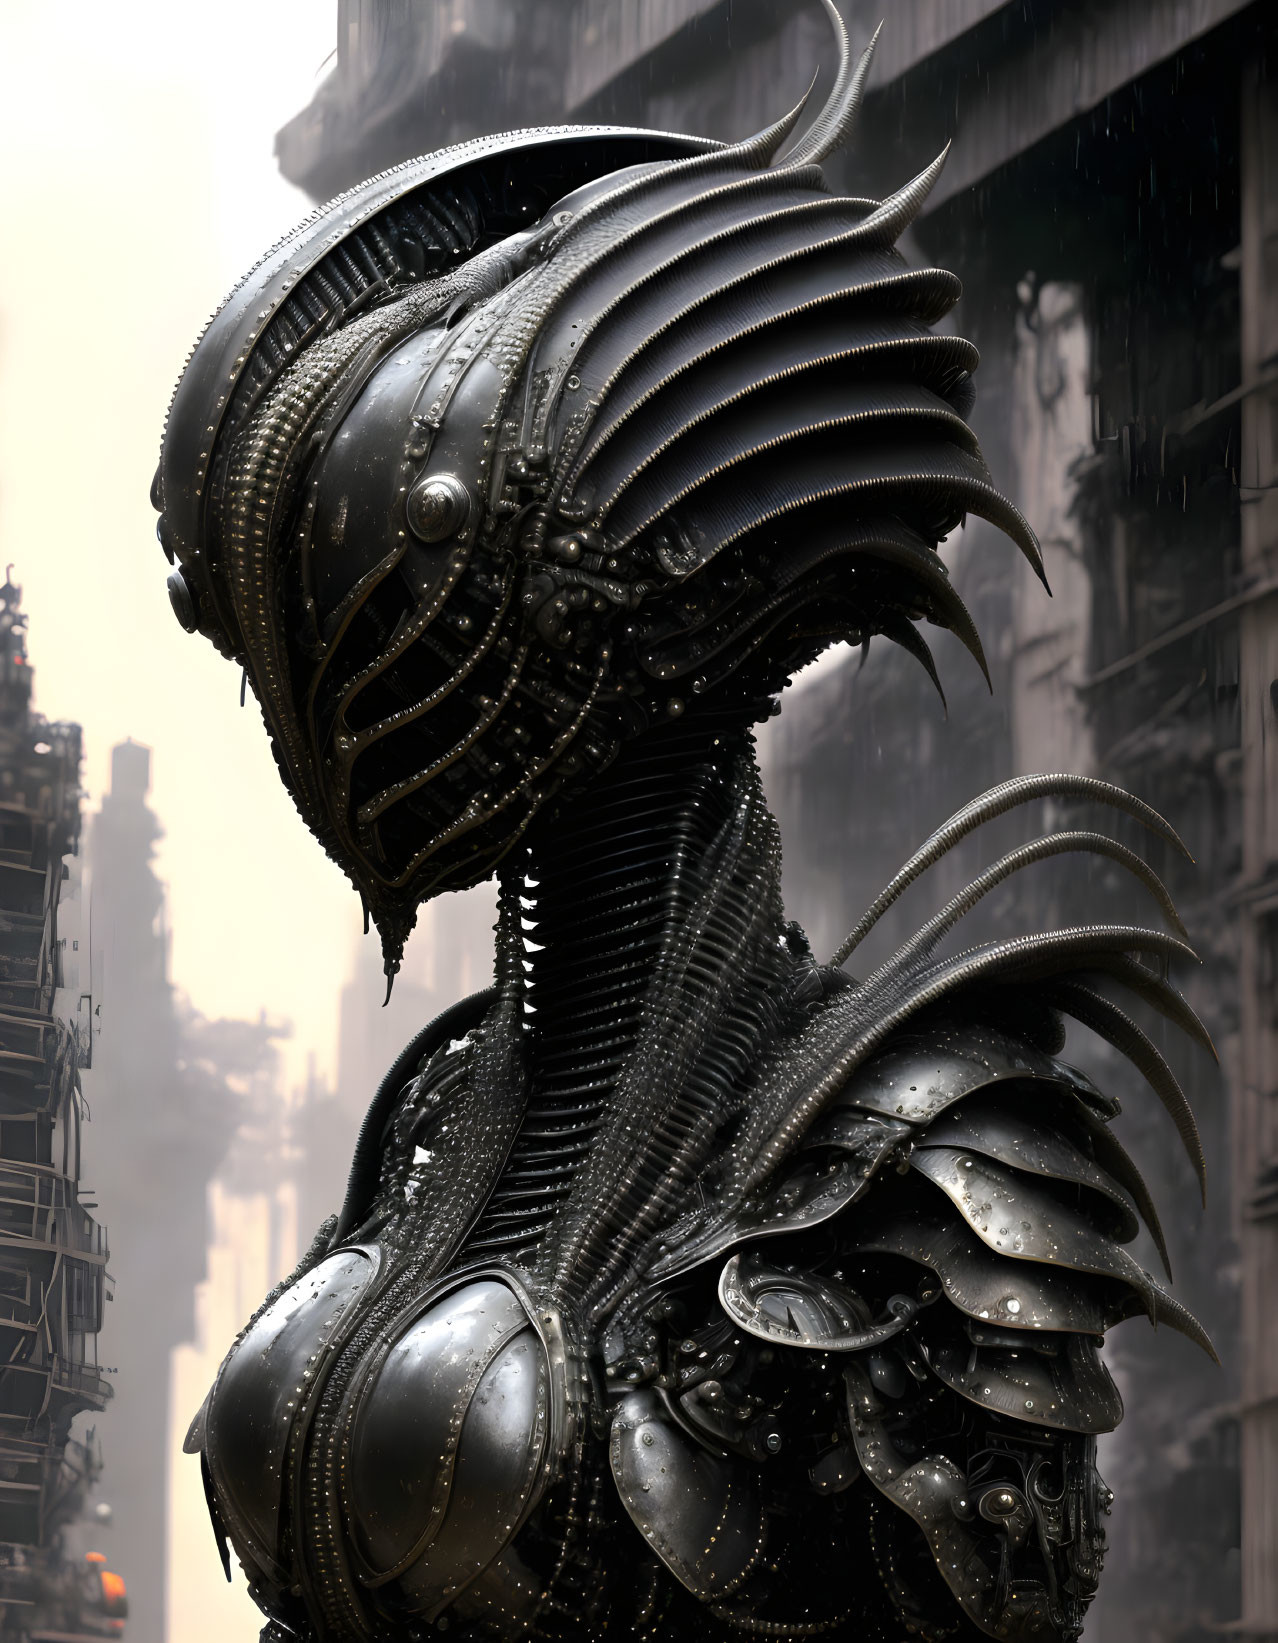 Detailed mechanical alien bust with layered armored plates and hoses on dark industrial background.